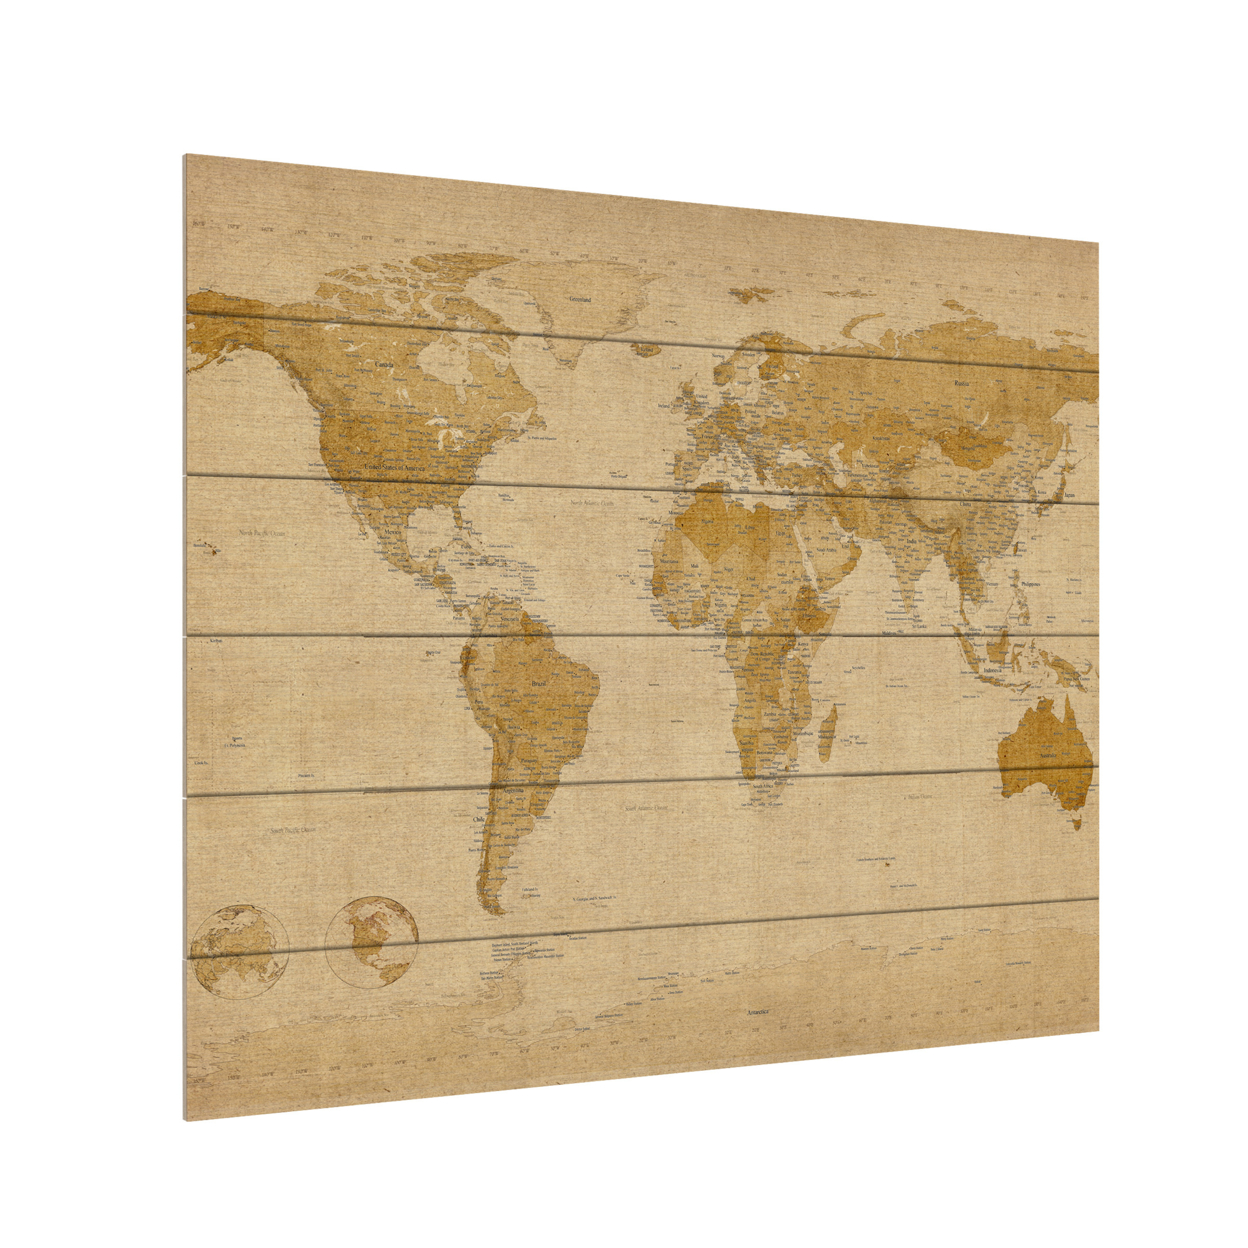 Wooden Slat Art 18 X 22 Inches Titled Antique World Map Ready To Hang Home Decor Picture